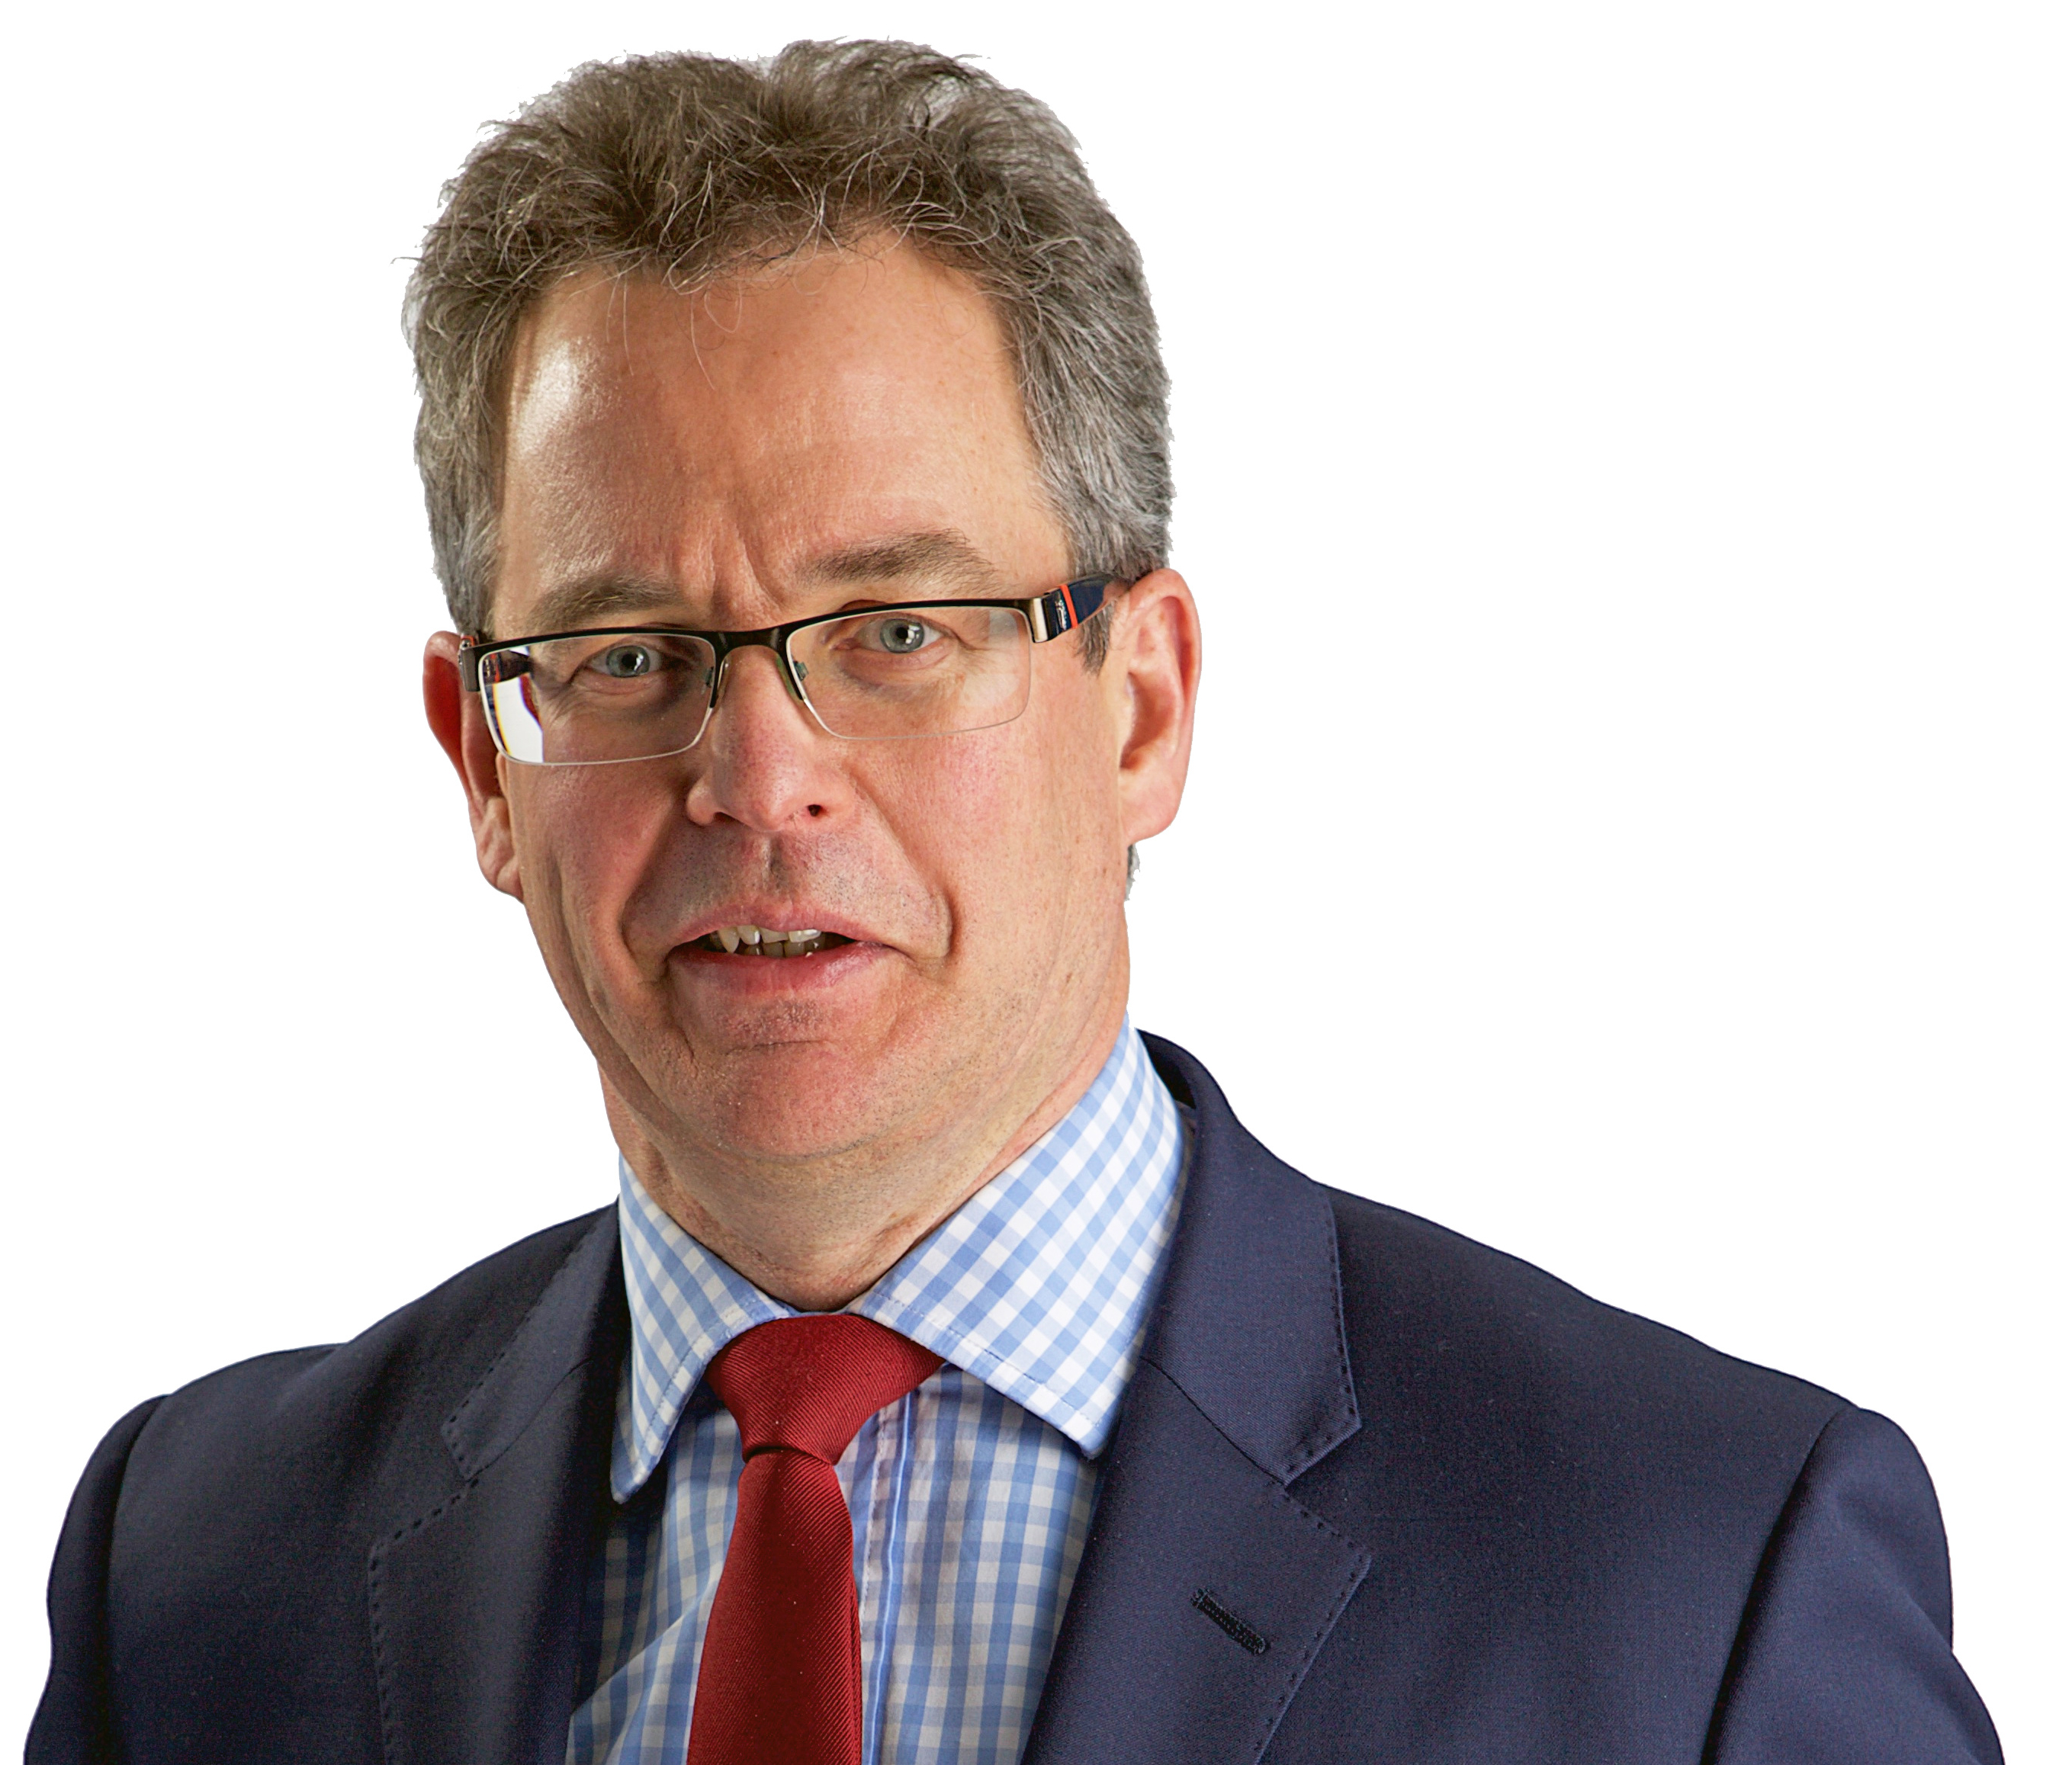 “Tax is the centre of the social contract” – SSE finance director